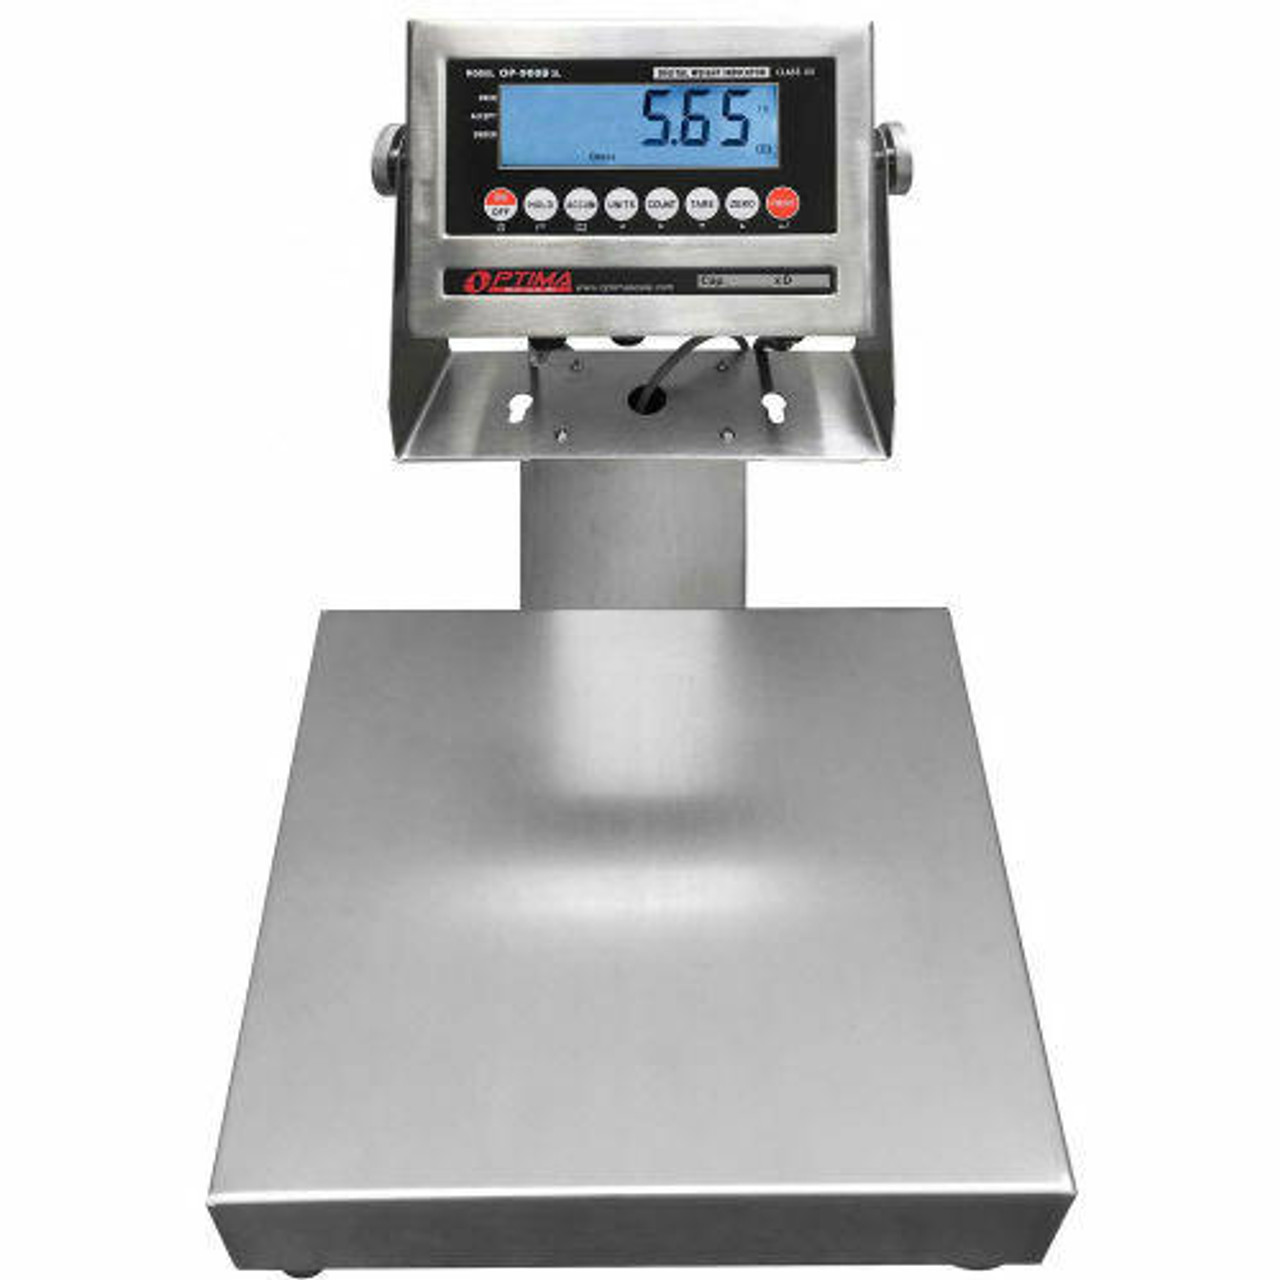 https://cdn11.bigcommerce.com/s-errhy7umuu/images/stencil/1280x1280/products/7584/34782/optima-scale-op-915ss-hp-30-stainless-steel-bench-scale-10-x-10-30-lb-x-0.001-lb__06508.1655243390.jpg?c=2